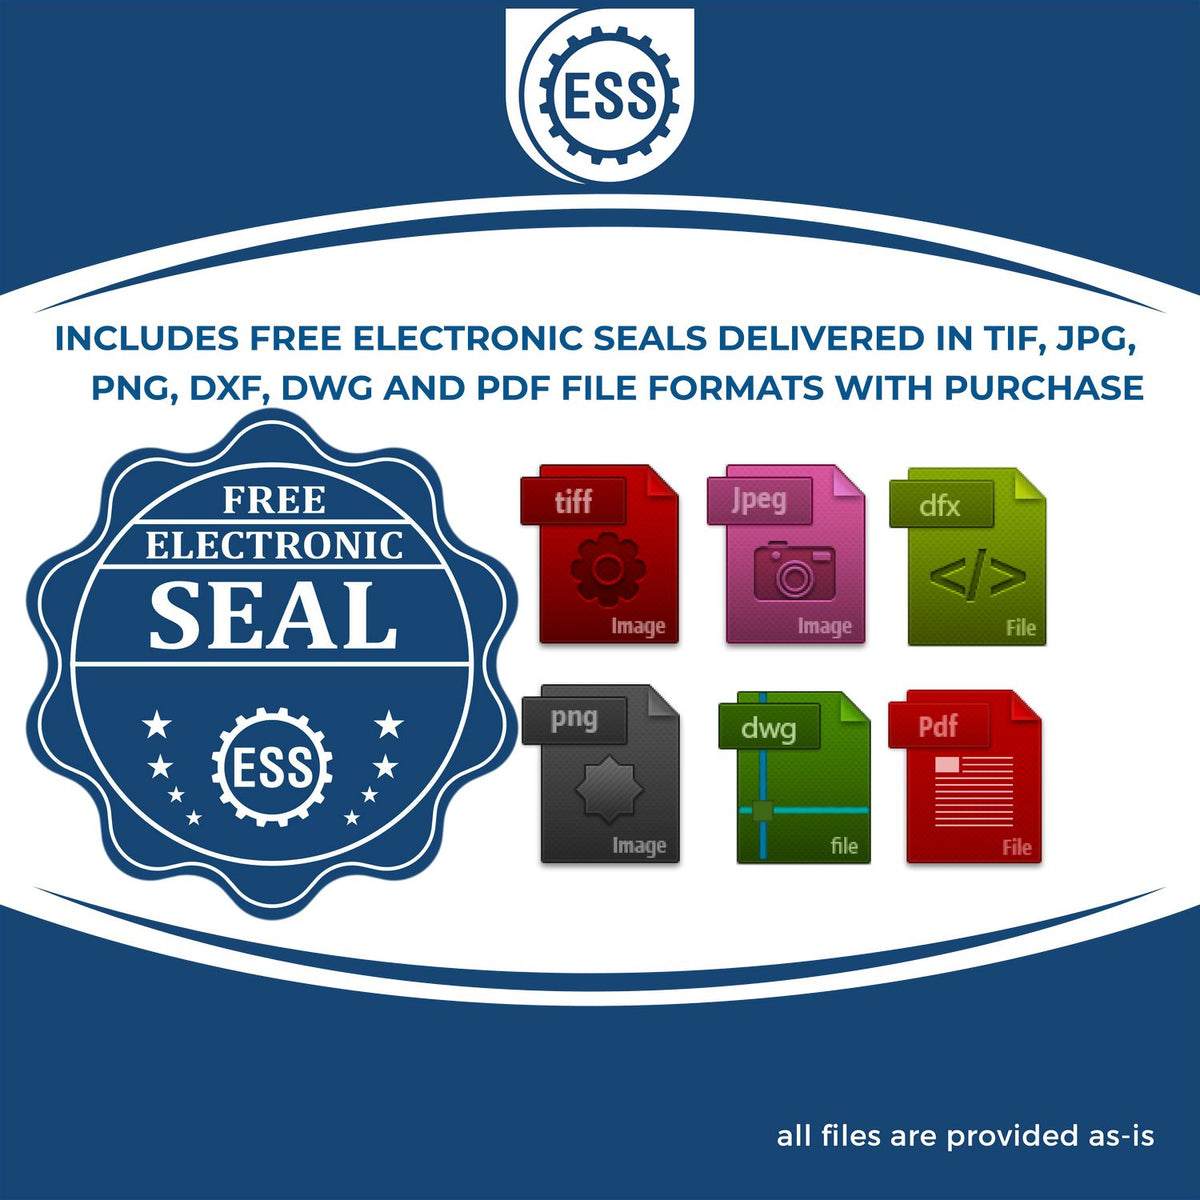 An infographic for the free electronic seal for the Self-Inking Kentucky PE Stamp illustrating the different file type icons such as DXF, DWG, TIF, JPG and PNG.